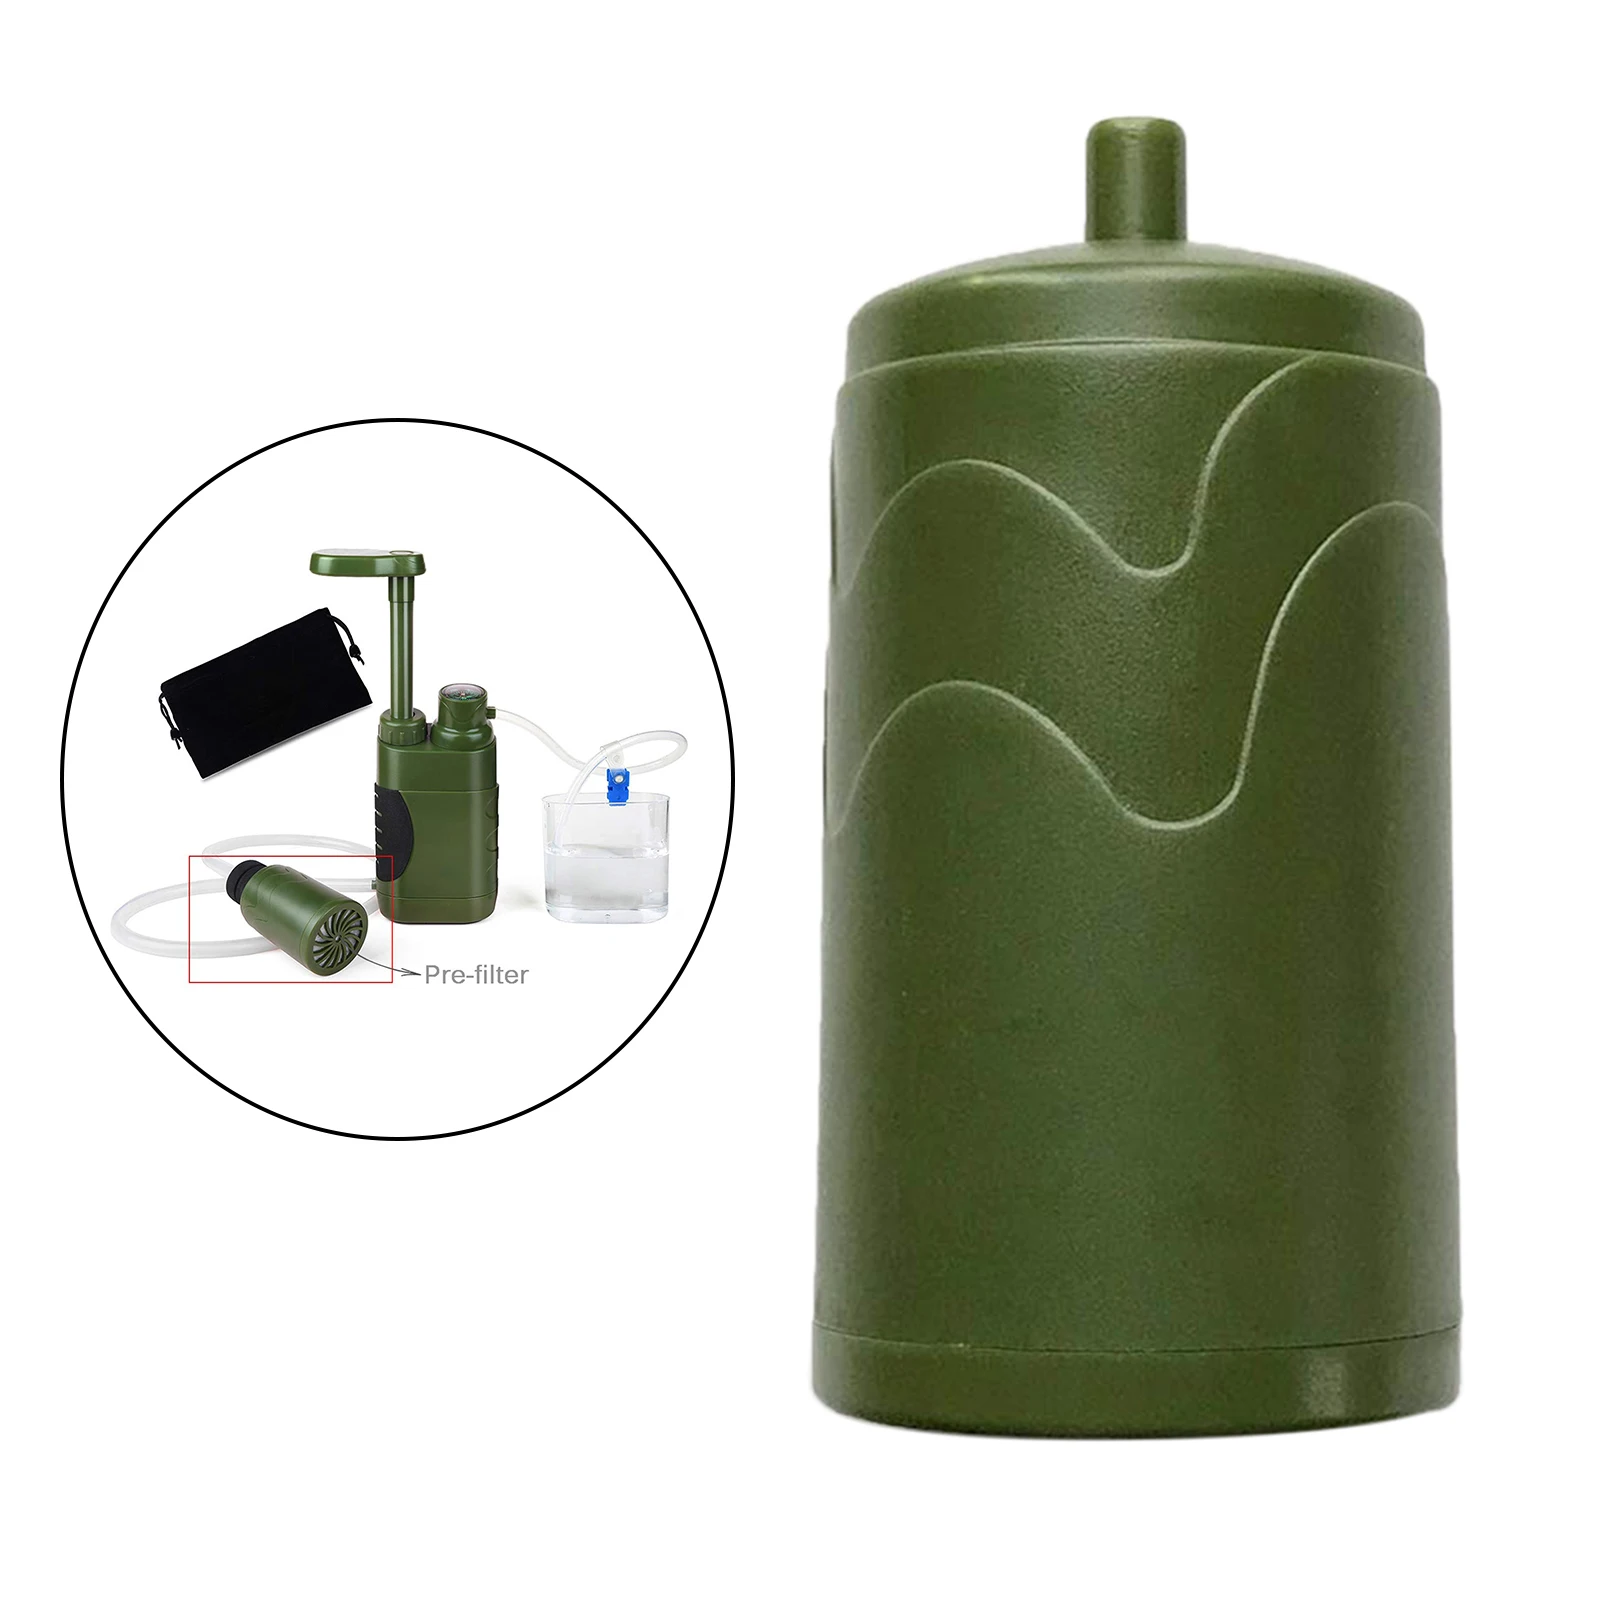 Replaceable Pre-Filter Filter for Outdoor Survival Water Purifier Filtration Emergency Camping Hiking Travel Preparedness